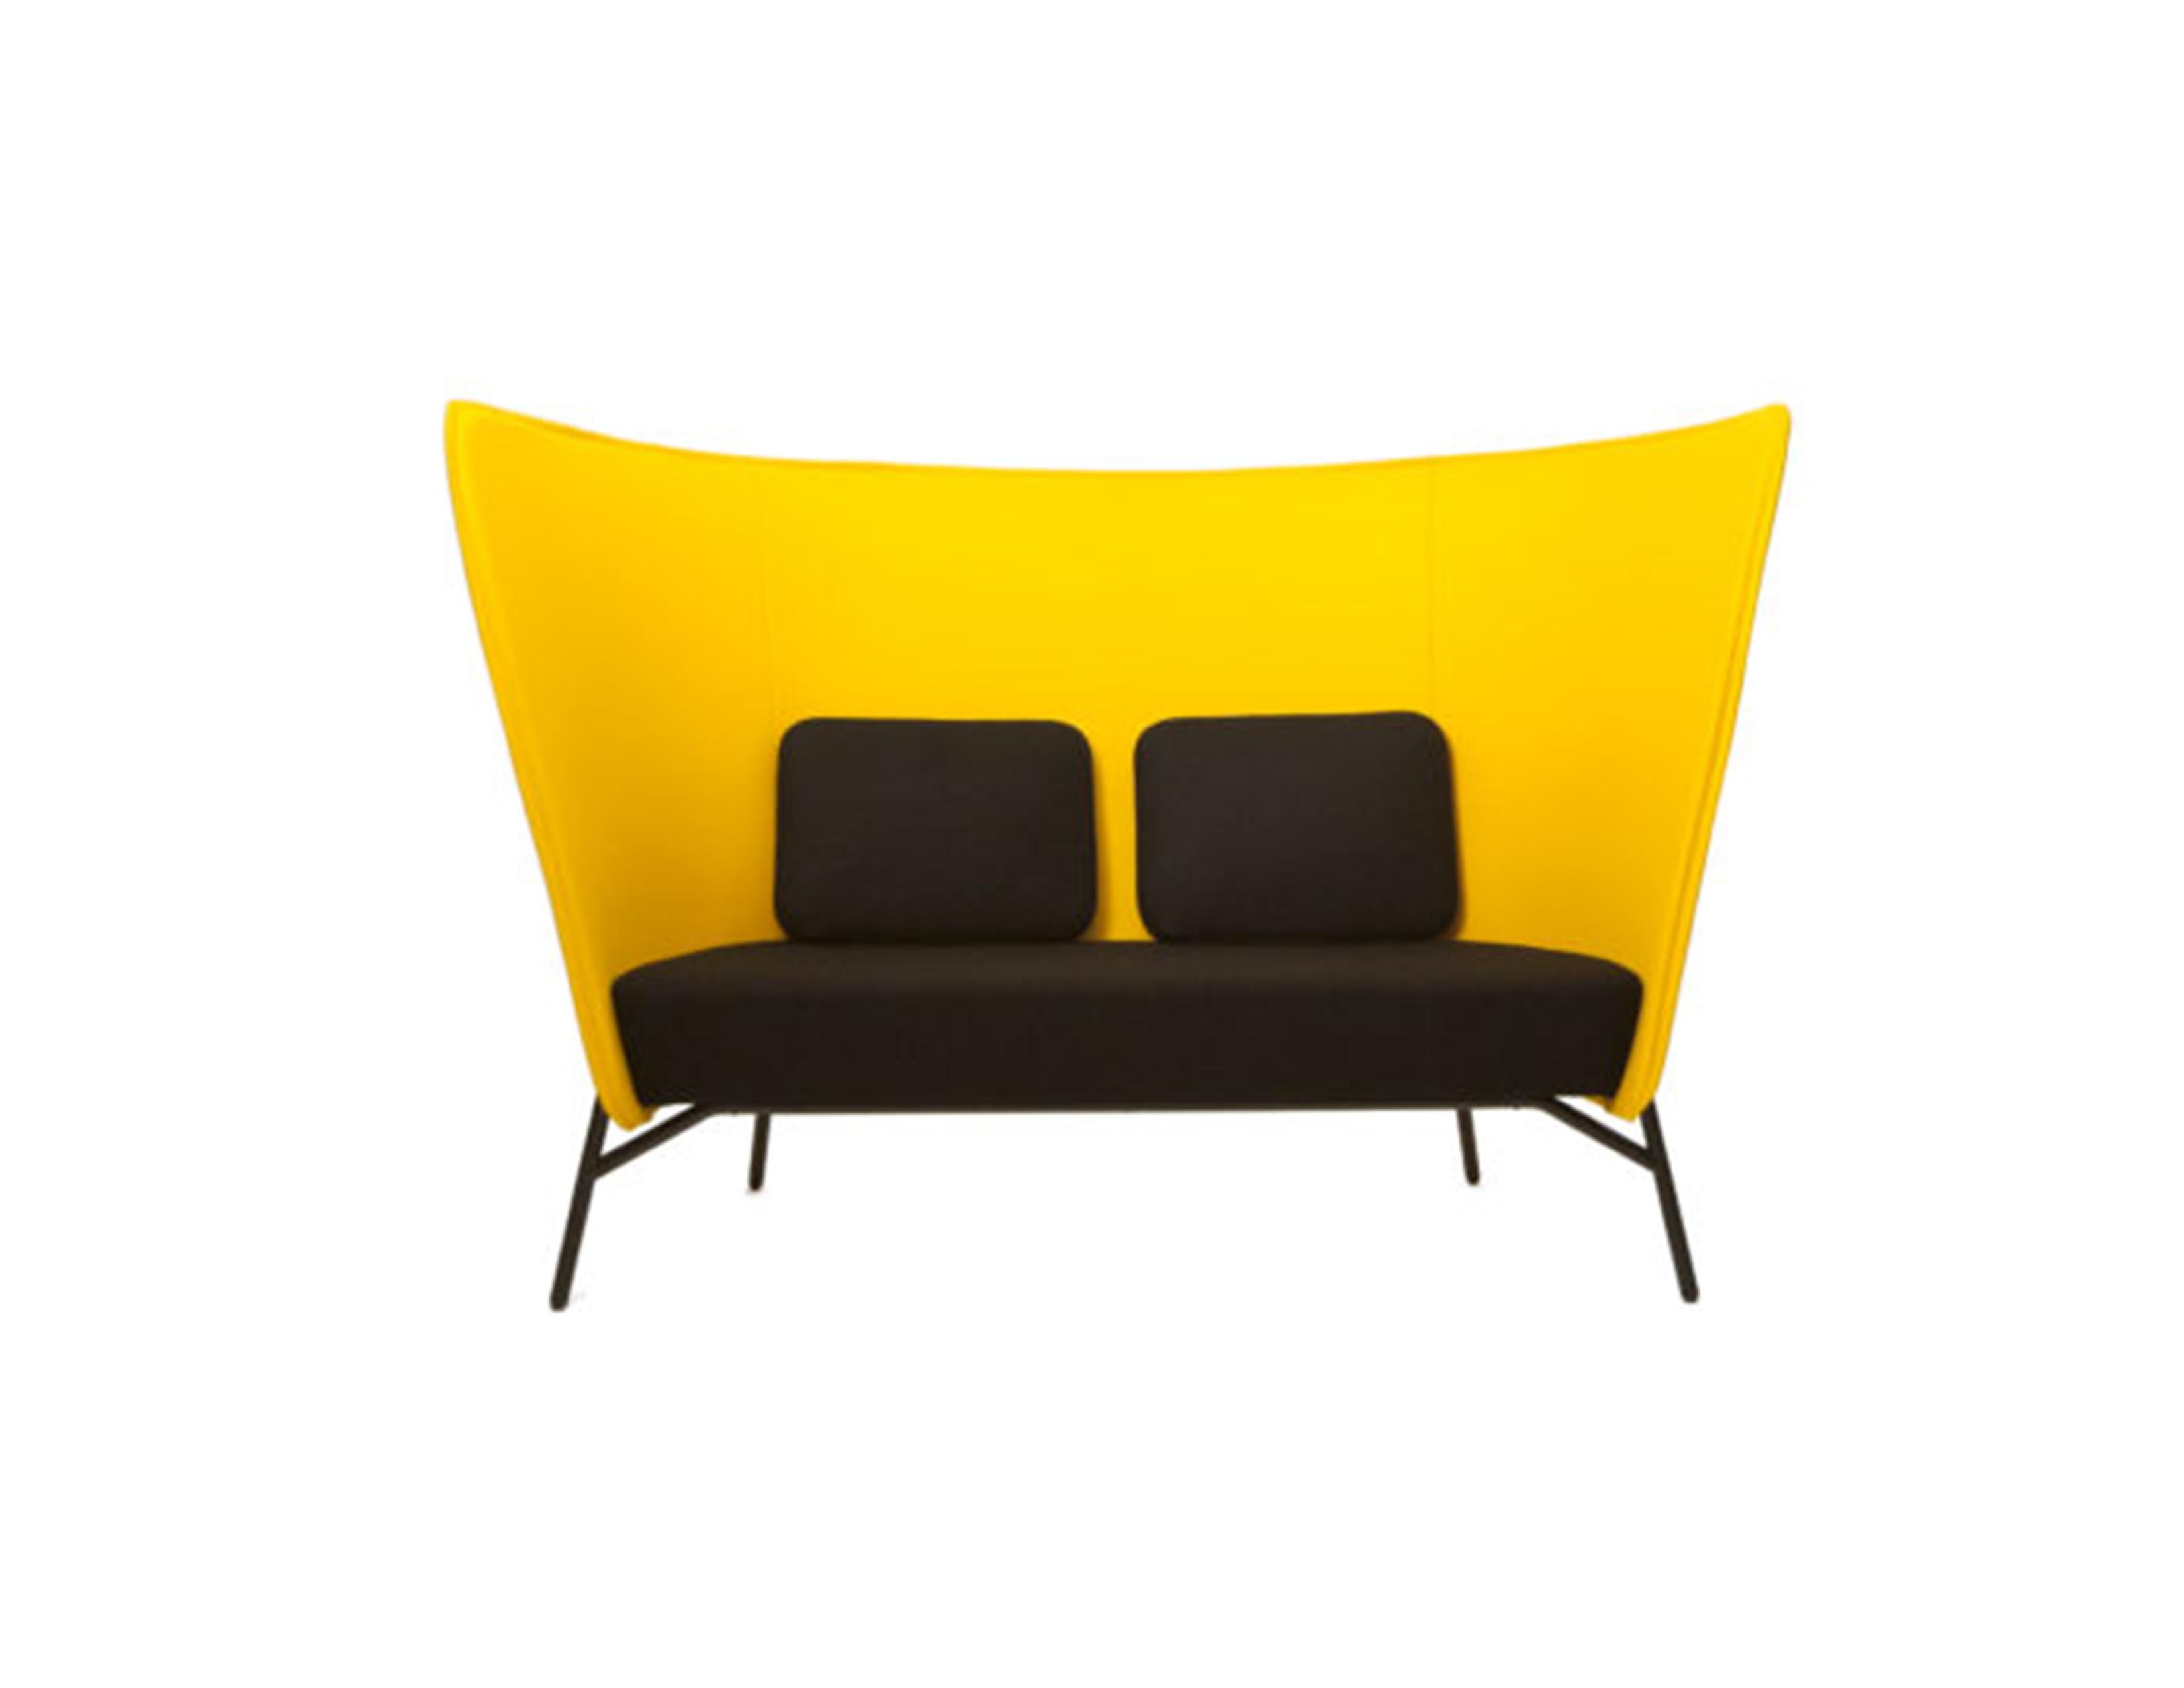 Aura sofa L is defined by its sheltering high back that creates a secluded niche even in the busiest of environments. The high sculptural form of the 2-seat sofa is a striking architectural element, but it also offers privacy and withdrawal in open